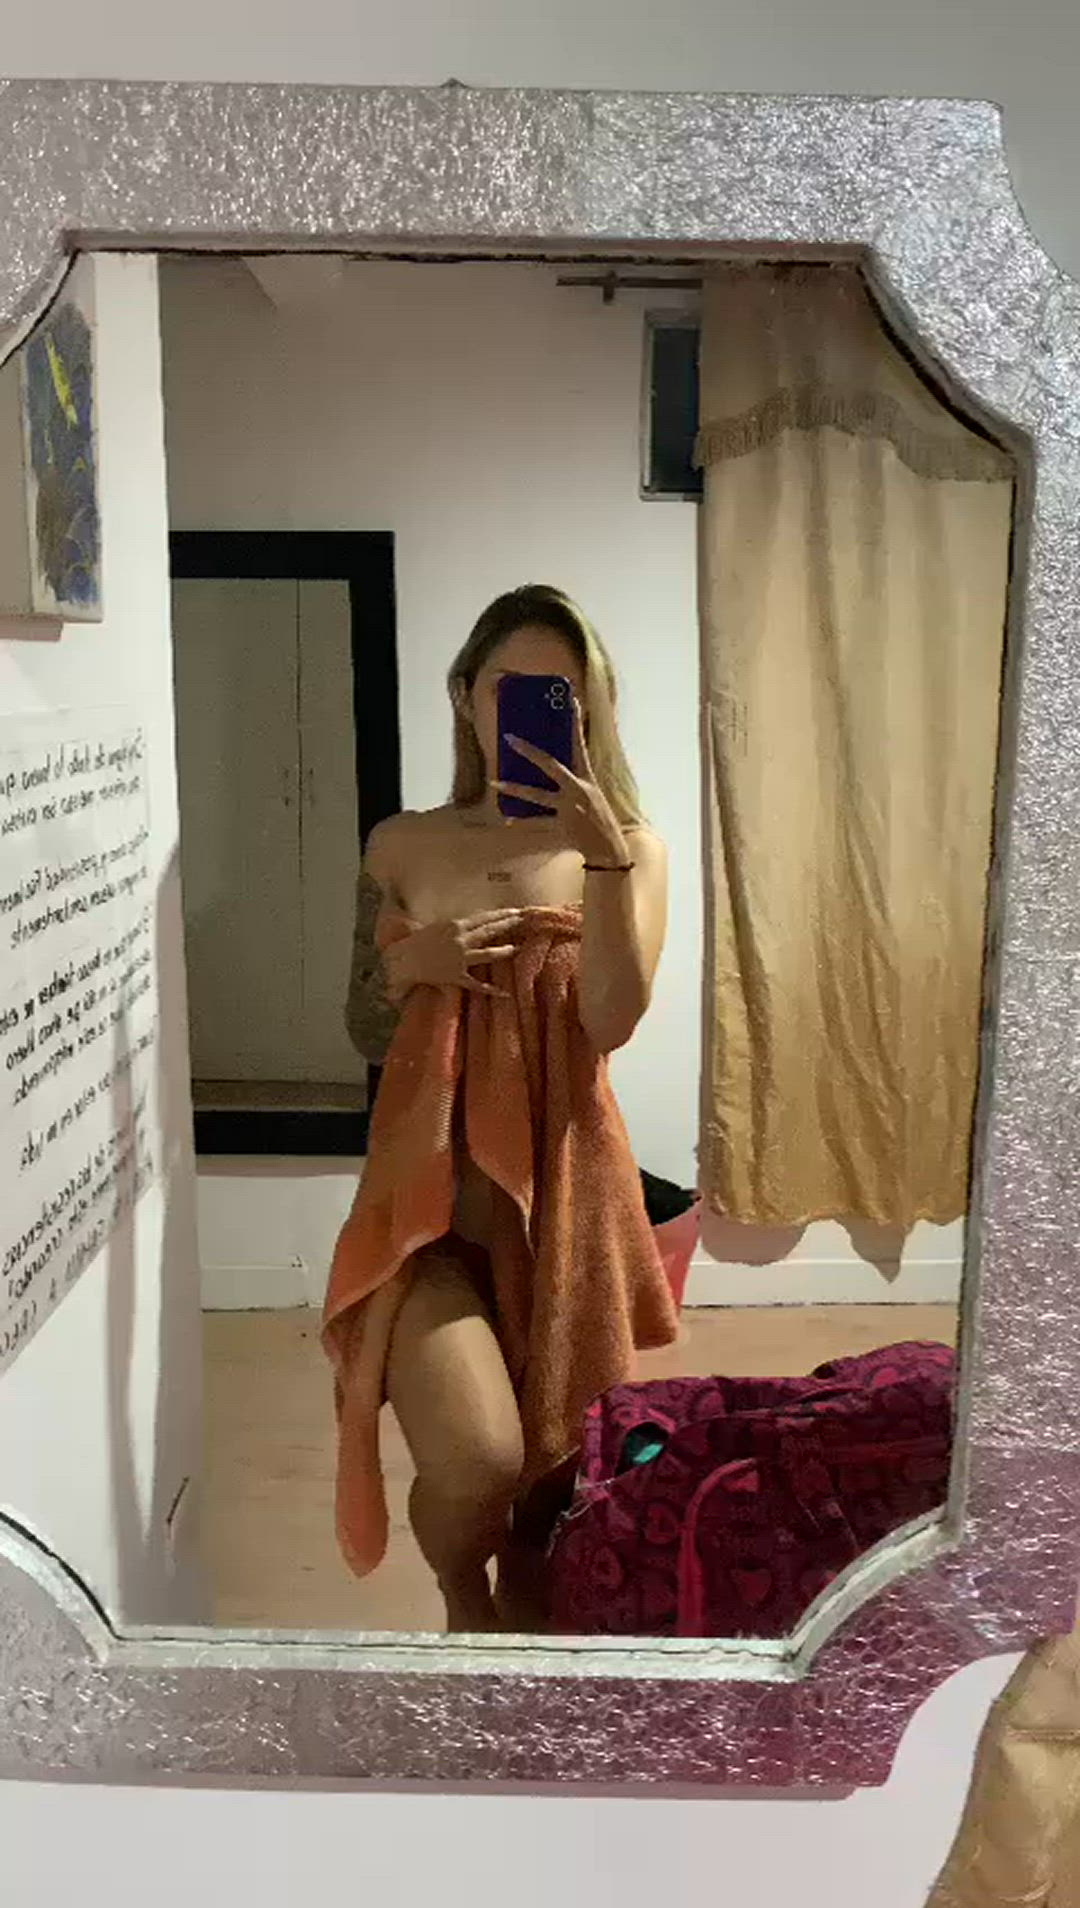 Amateur porn video with onlyfans model Camil0530 <strong>@camil0530</strong>